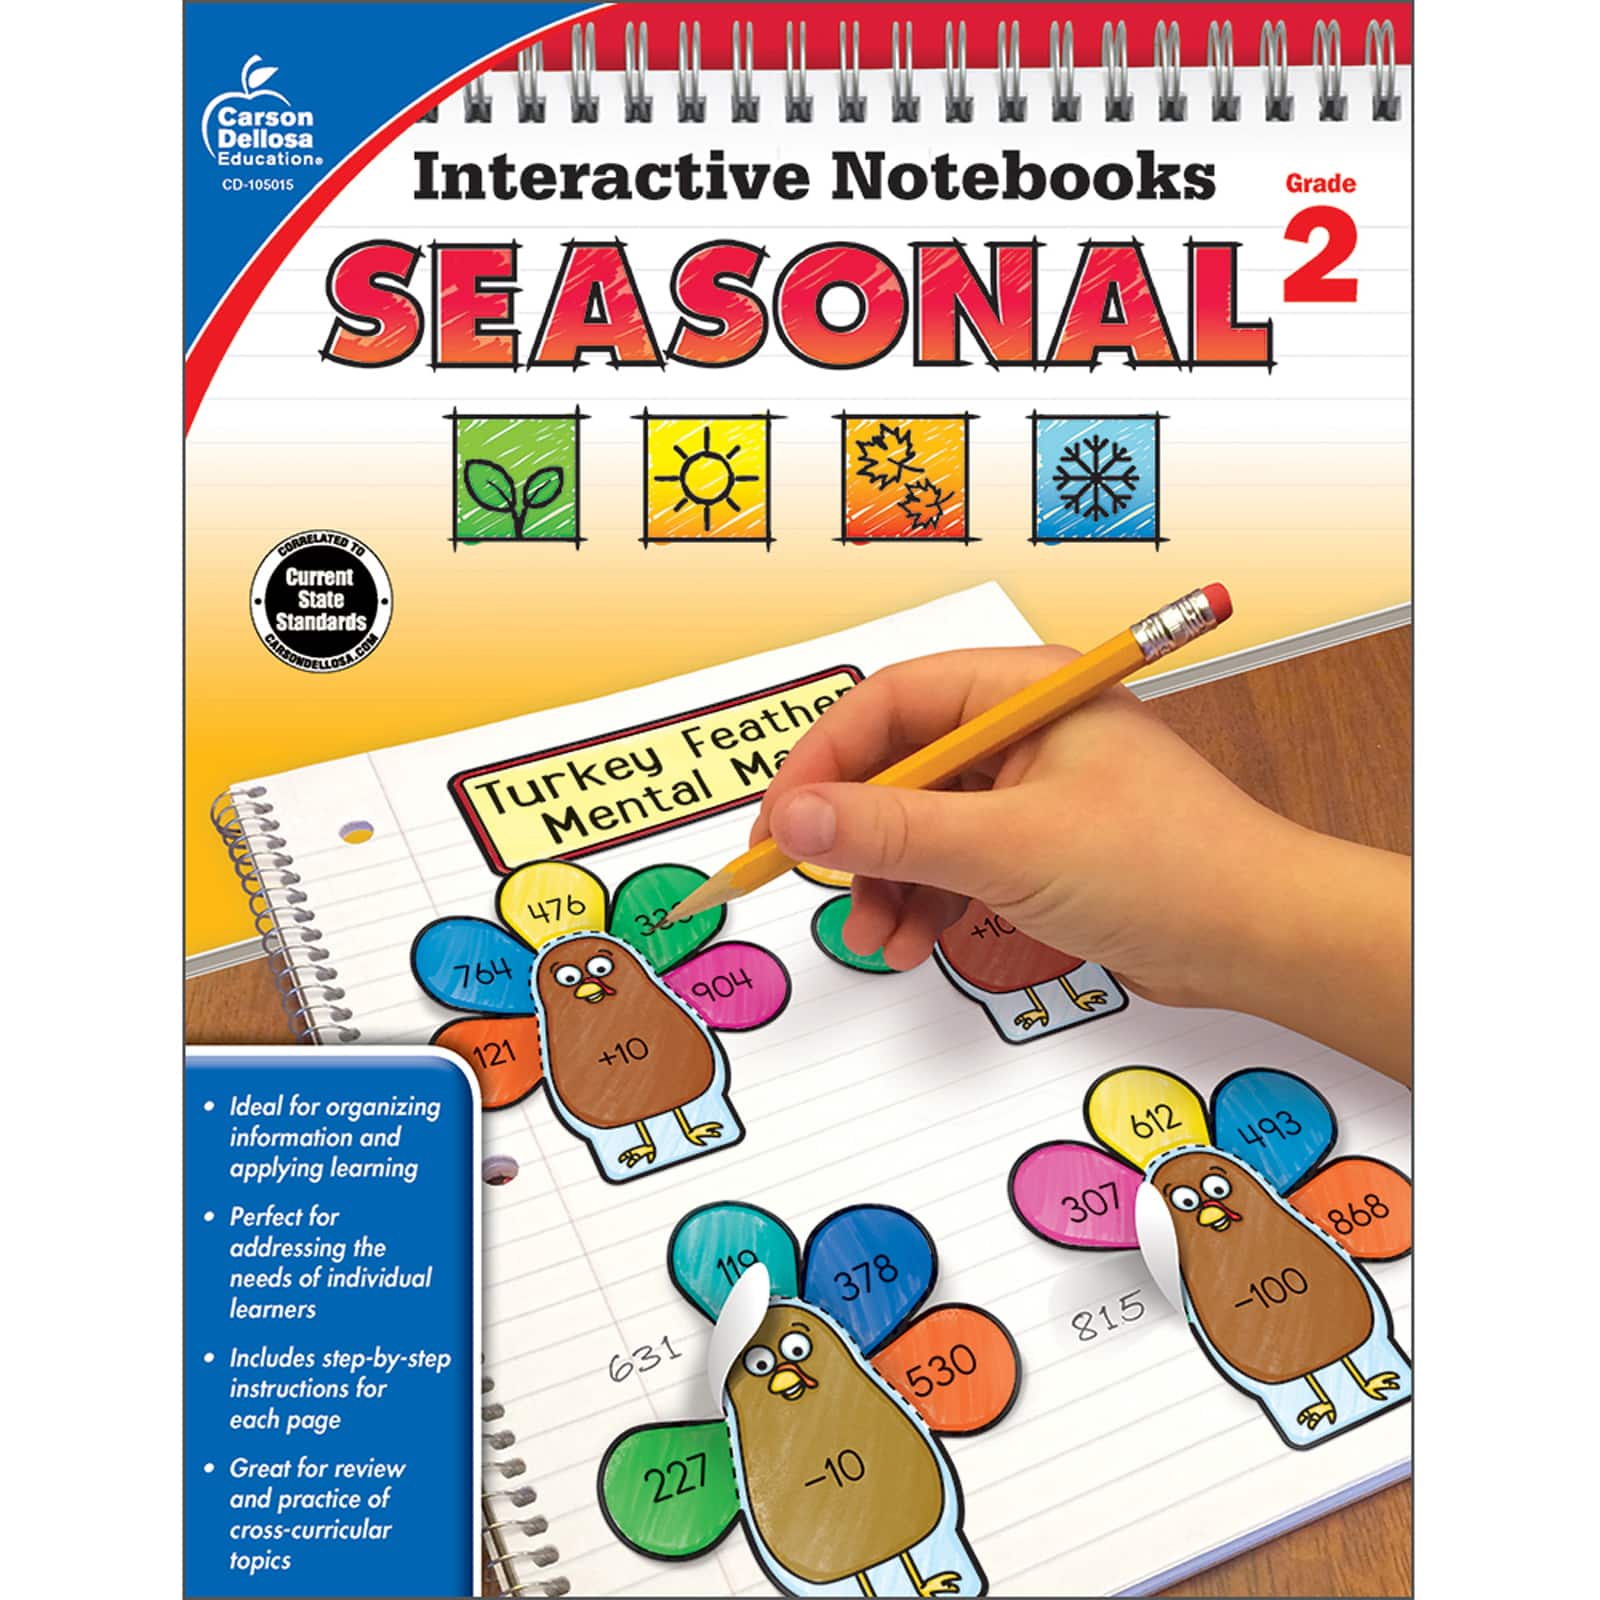 Purchase the Interactive Notebooks: Seasonal Resource Book, Grade 2 at Michaels